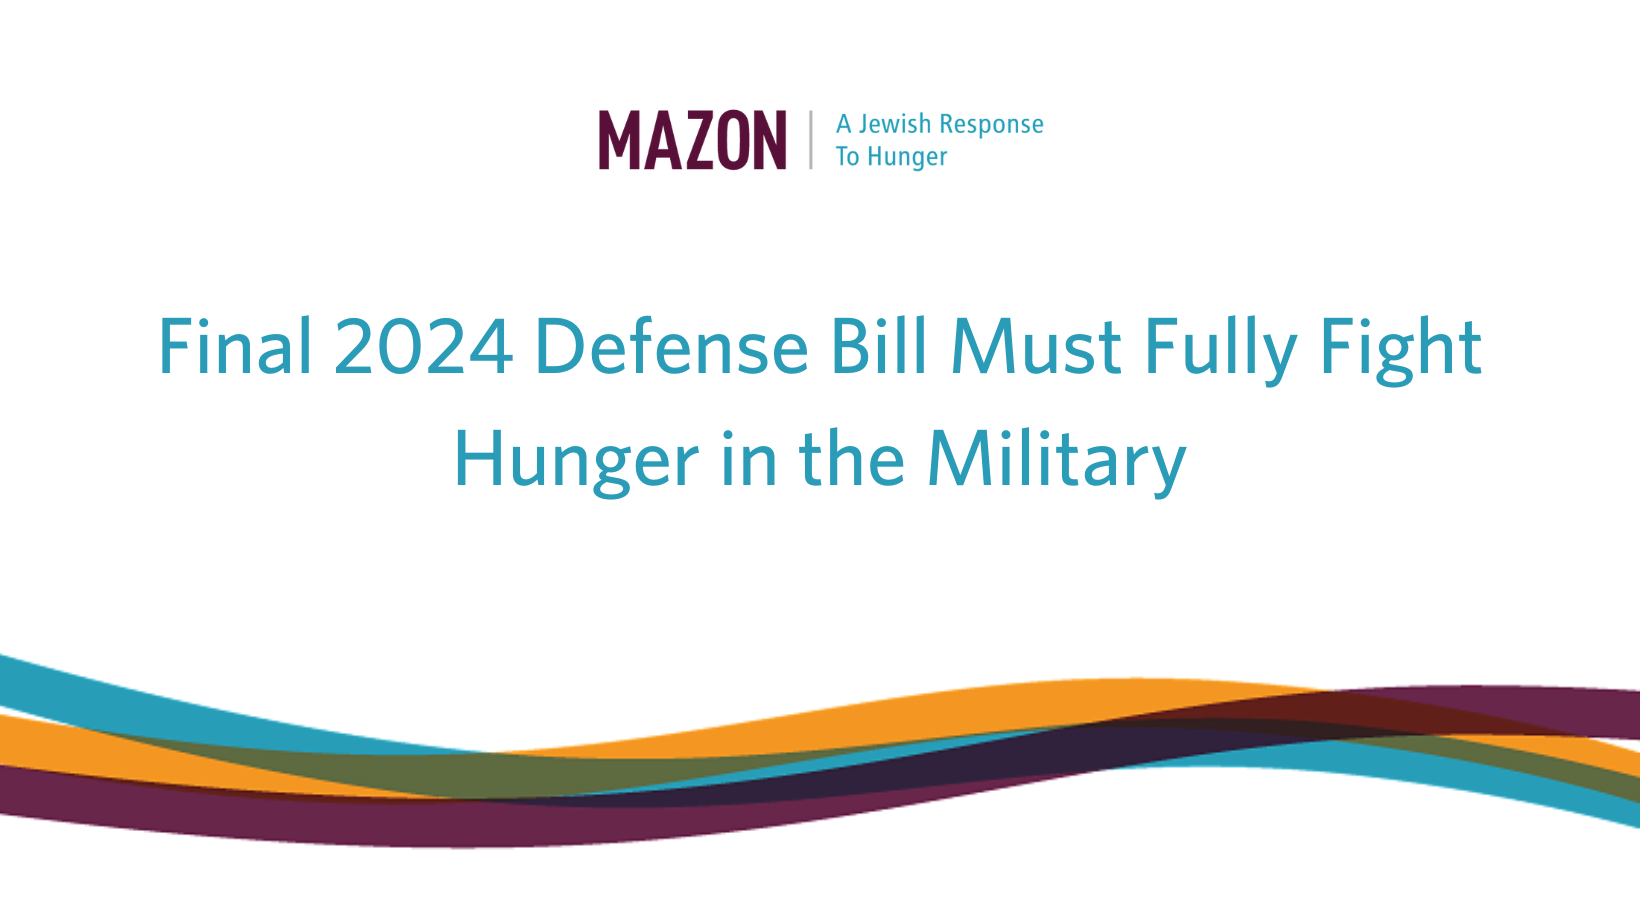 Final 2024 Defense Bill Must Fully Fight Hunger in the Military MAZON